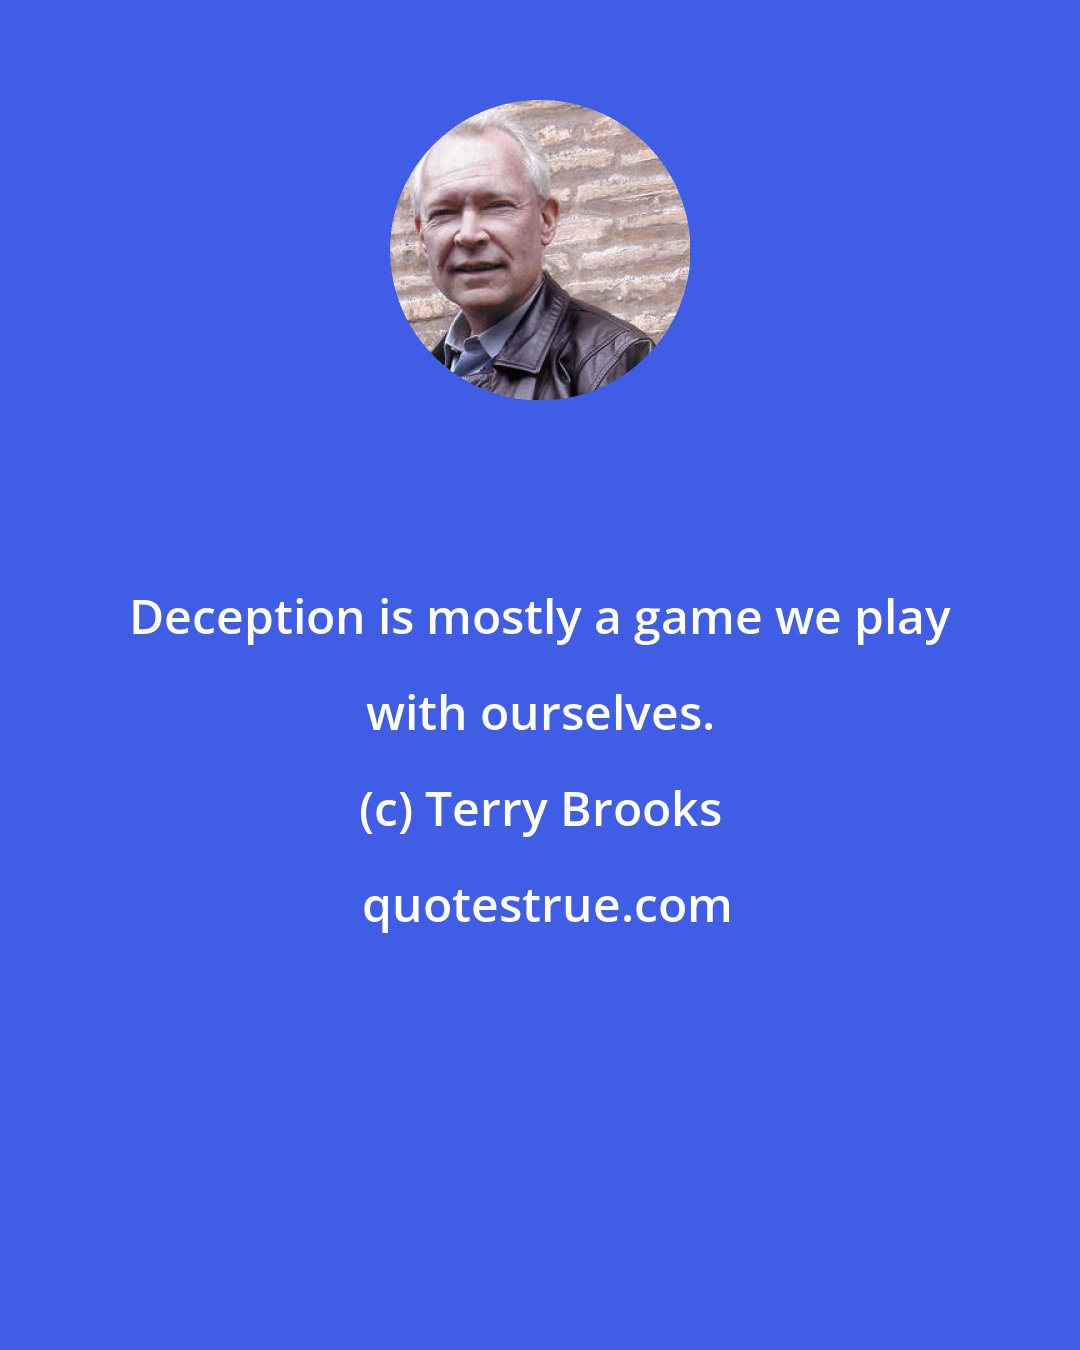 Terry Brooks: Deception is mostly a game we play with ourselves.